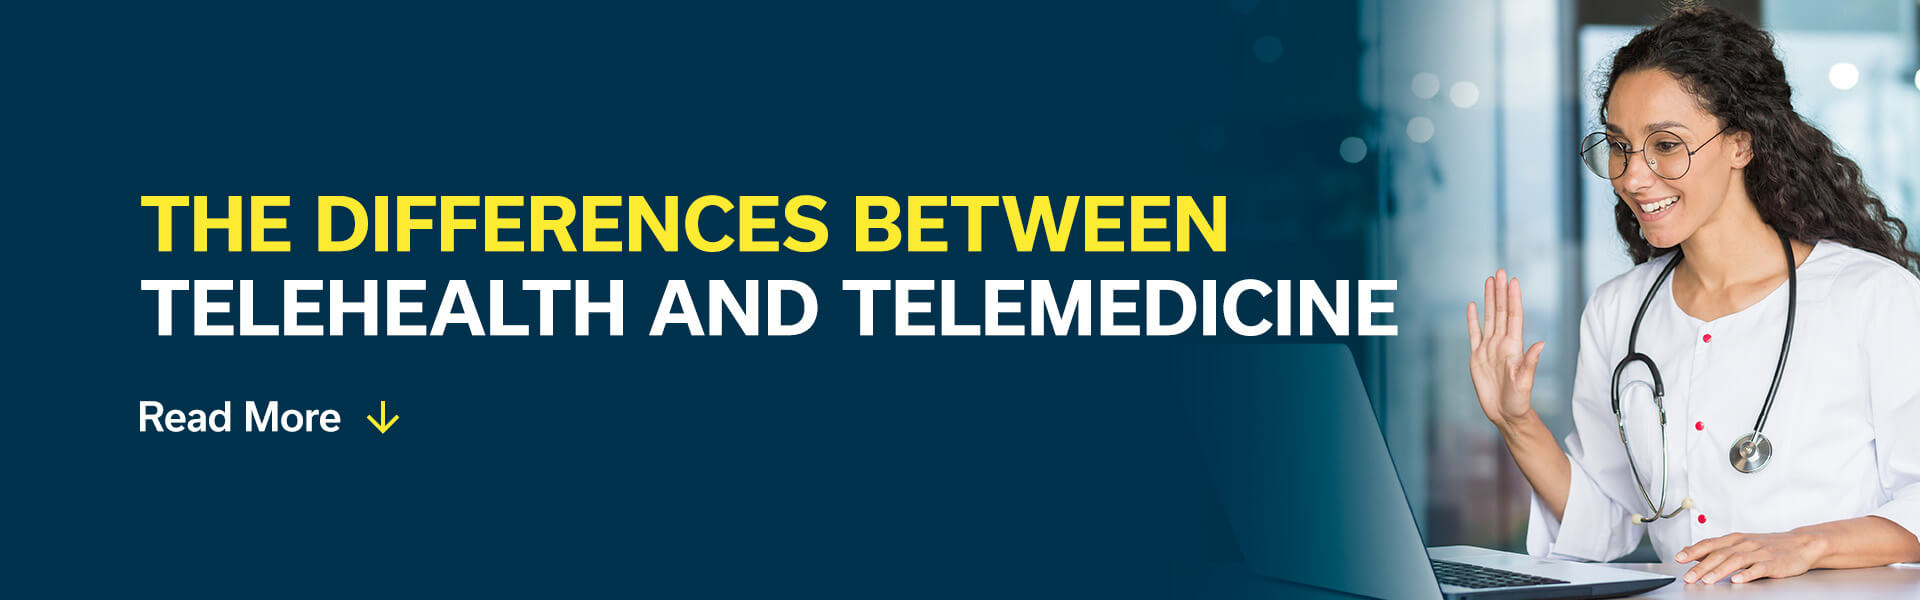 01-The-Differences-Between-Telehealth-and-Telemedicine